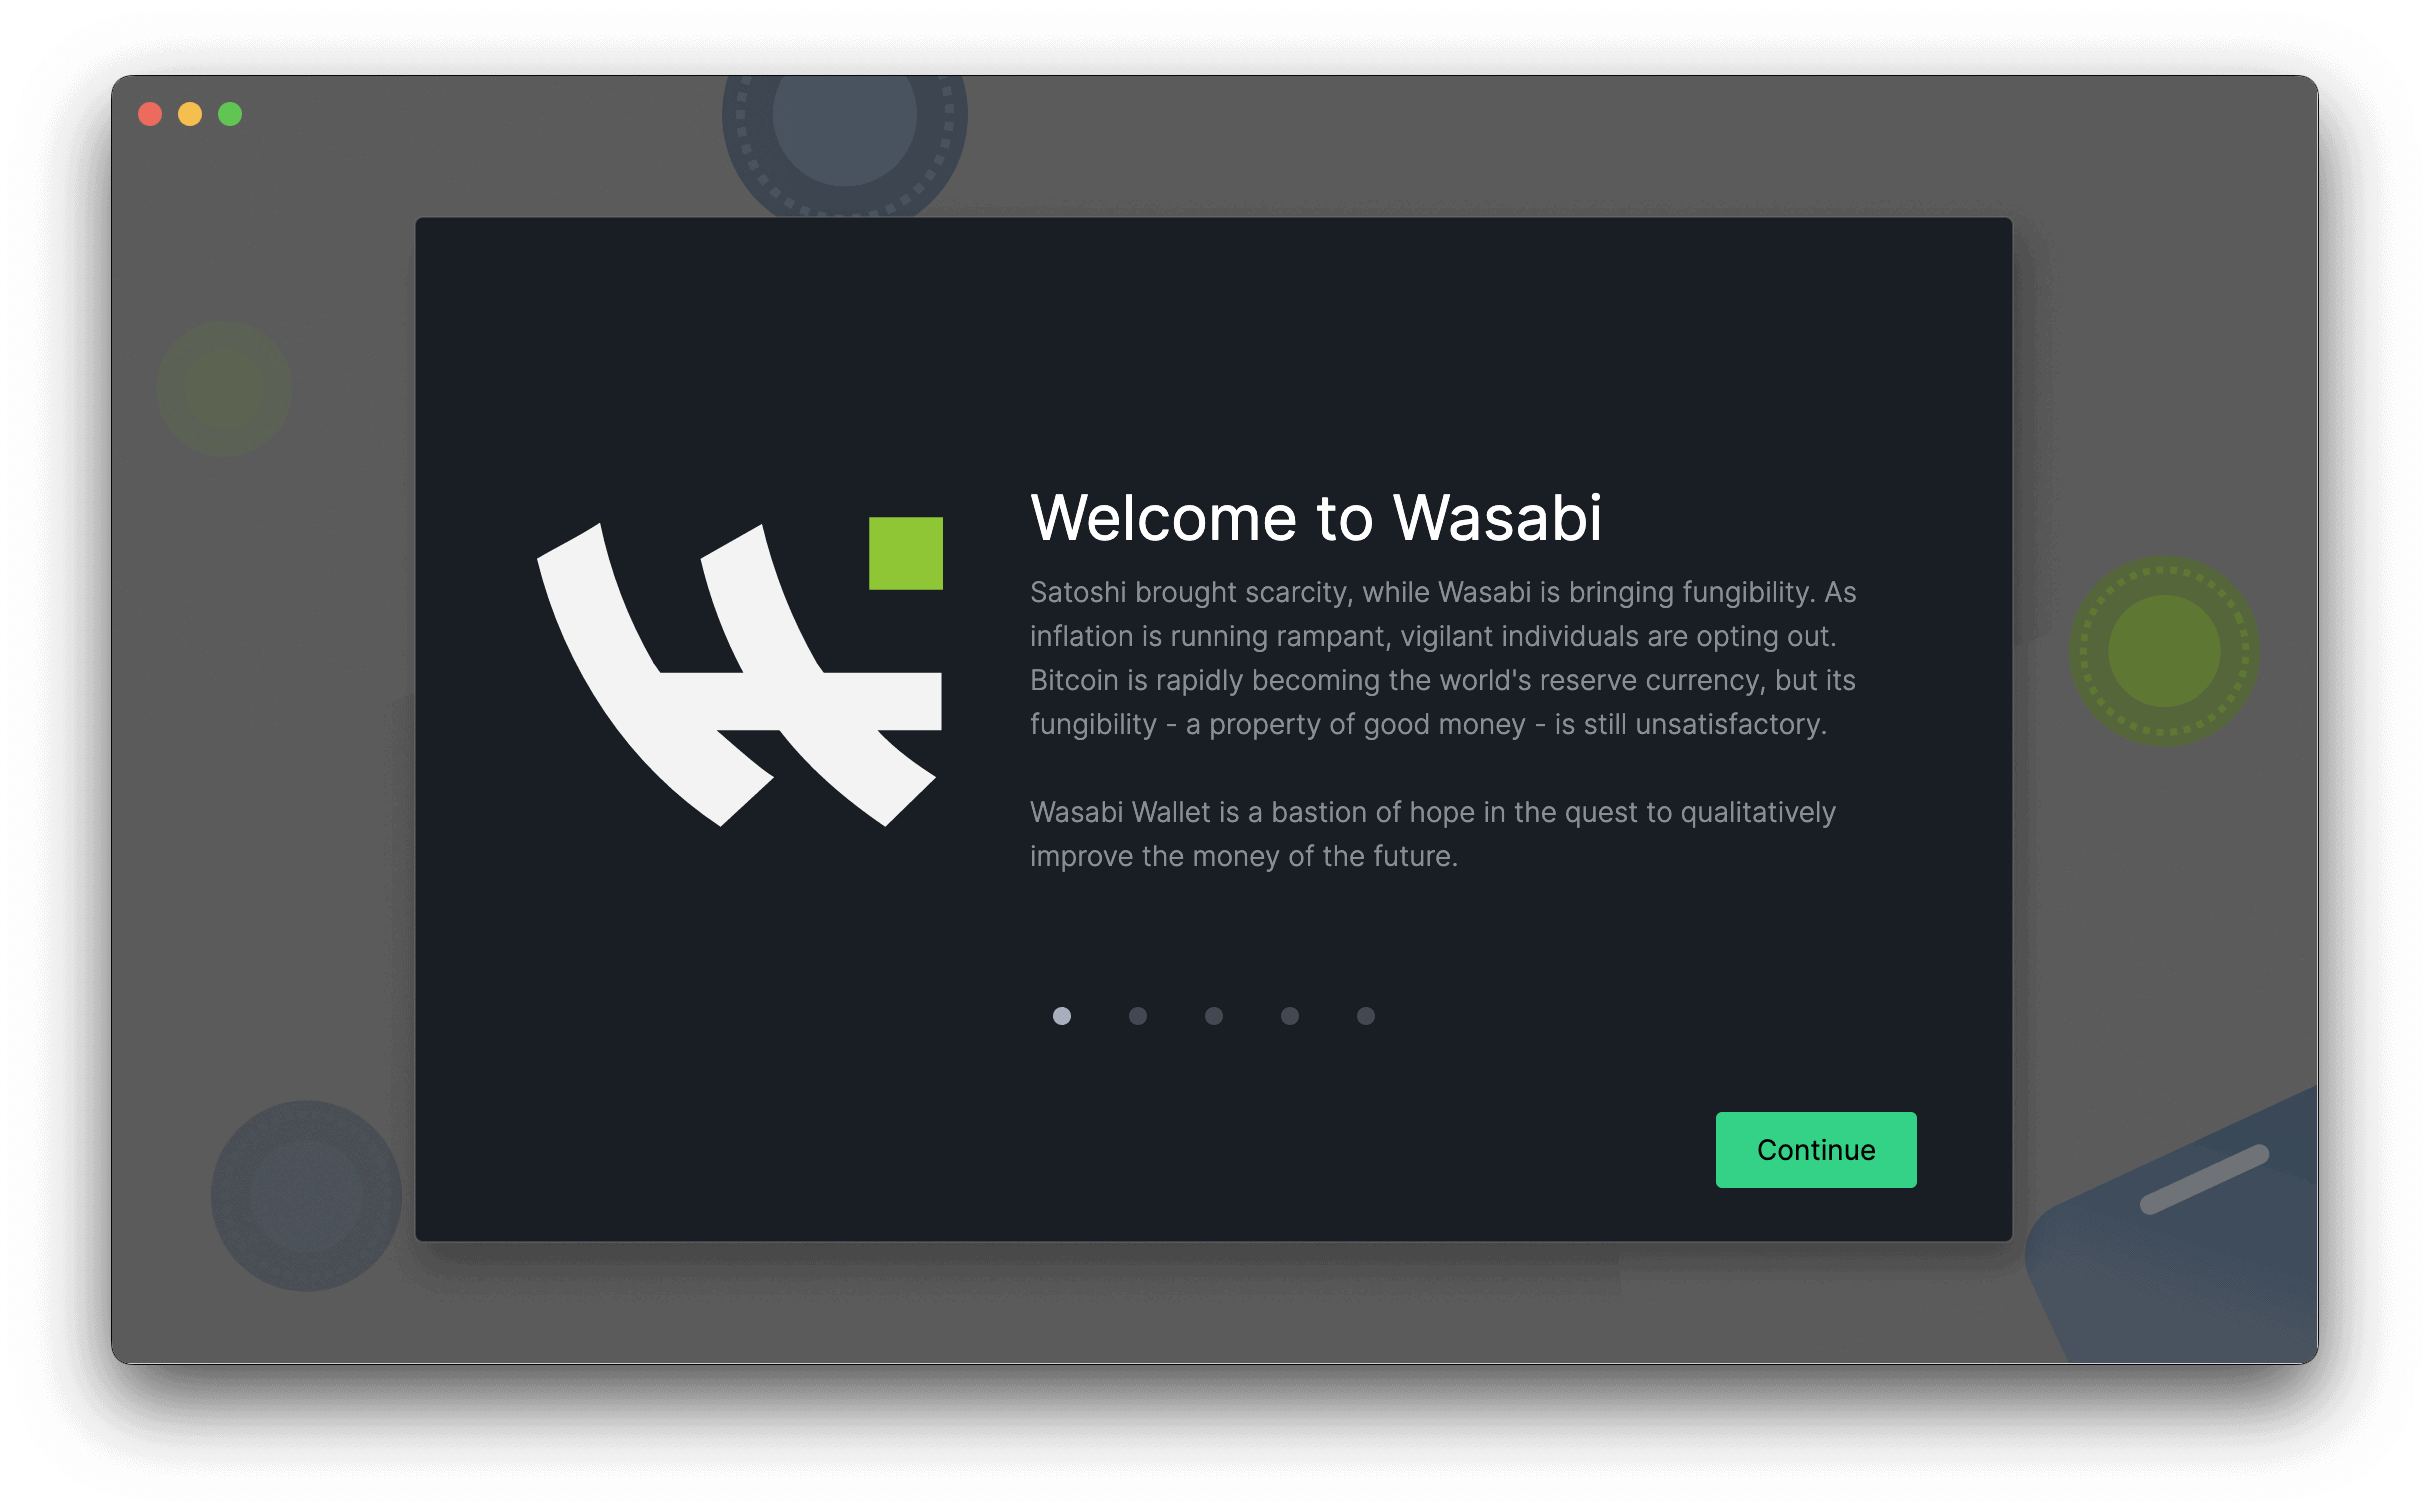 Welcome to wasabi 2.0